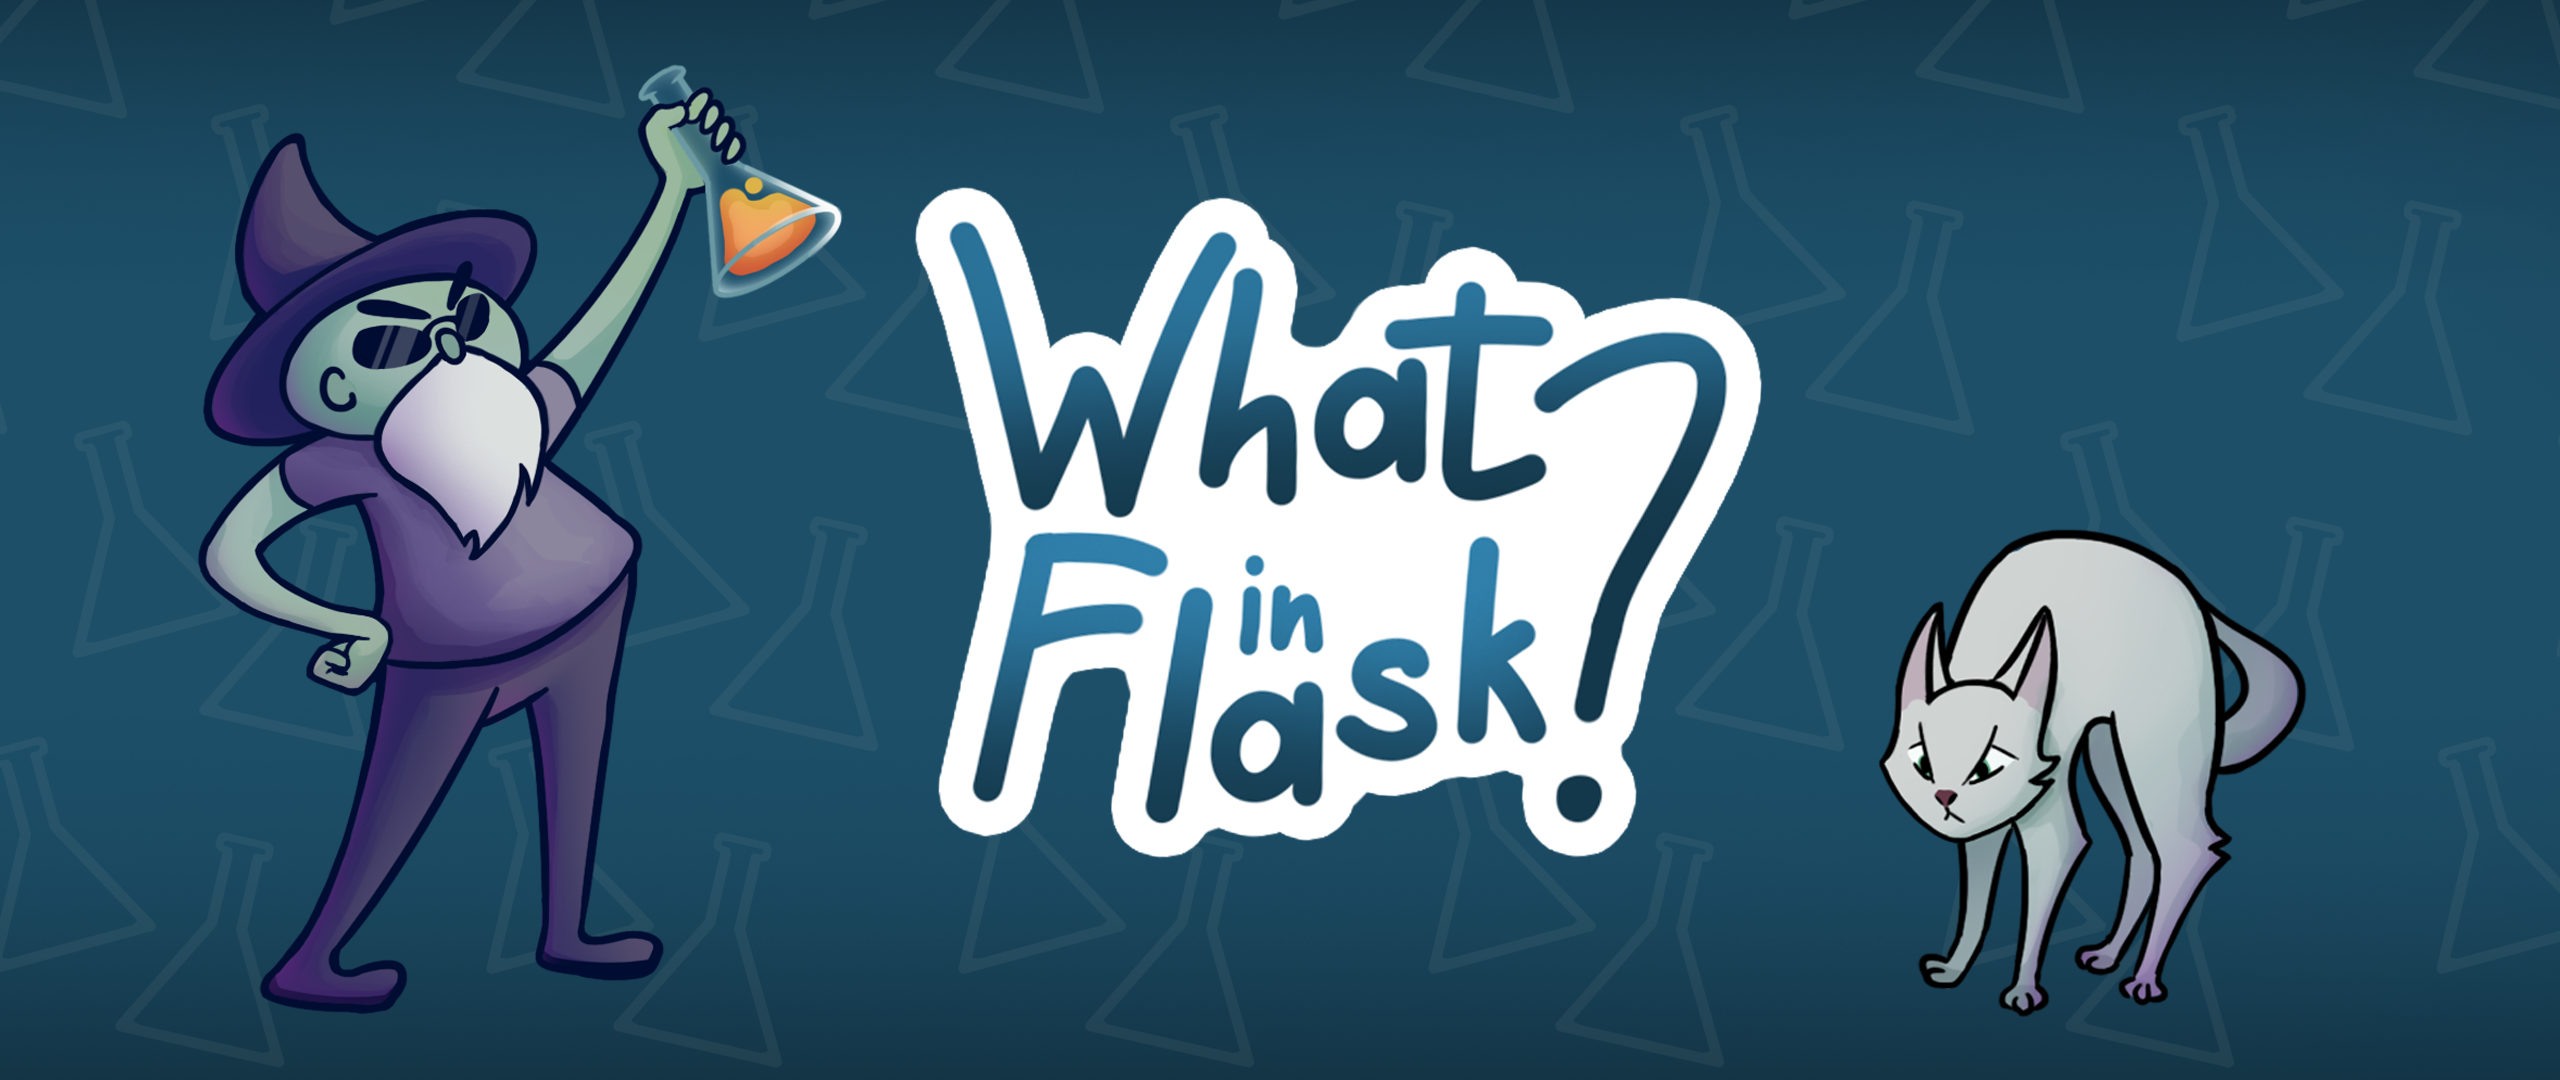 What in Flask?